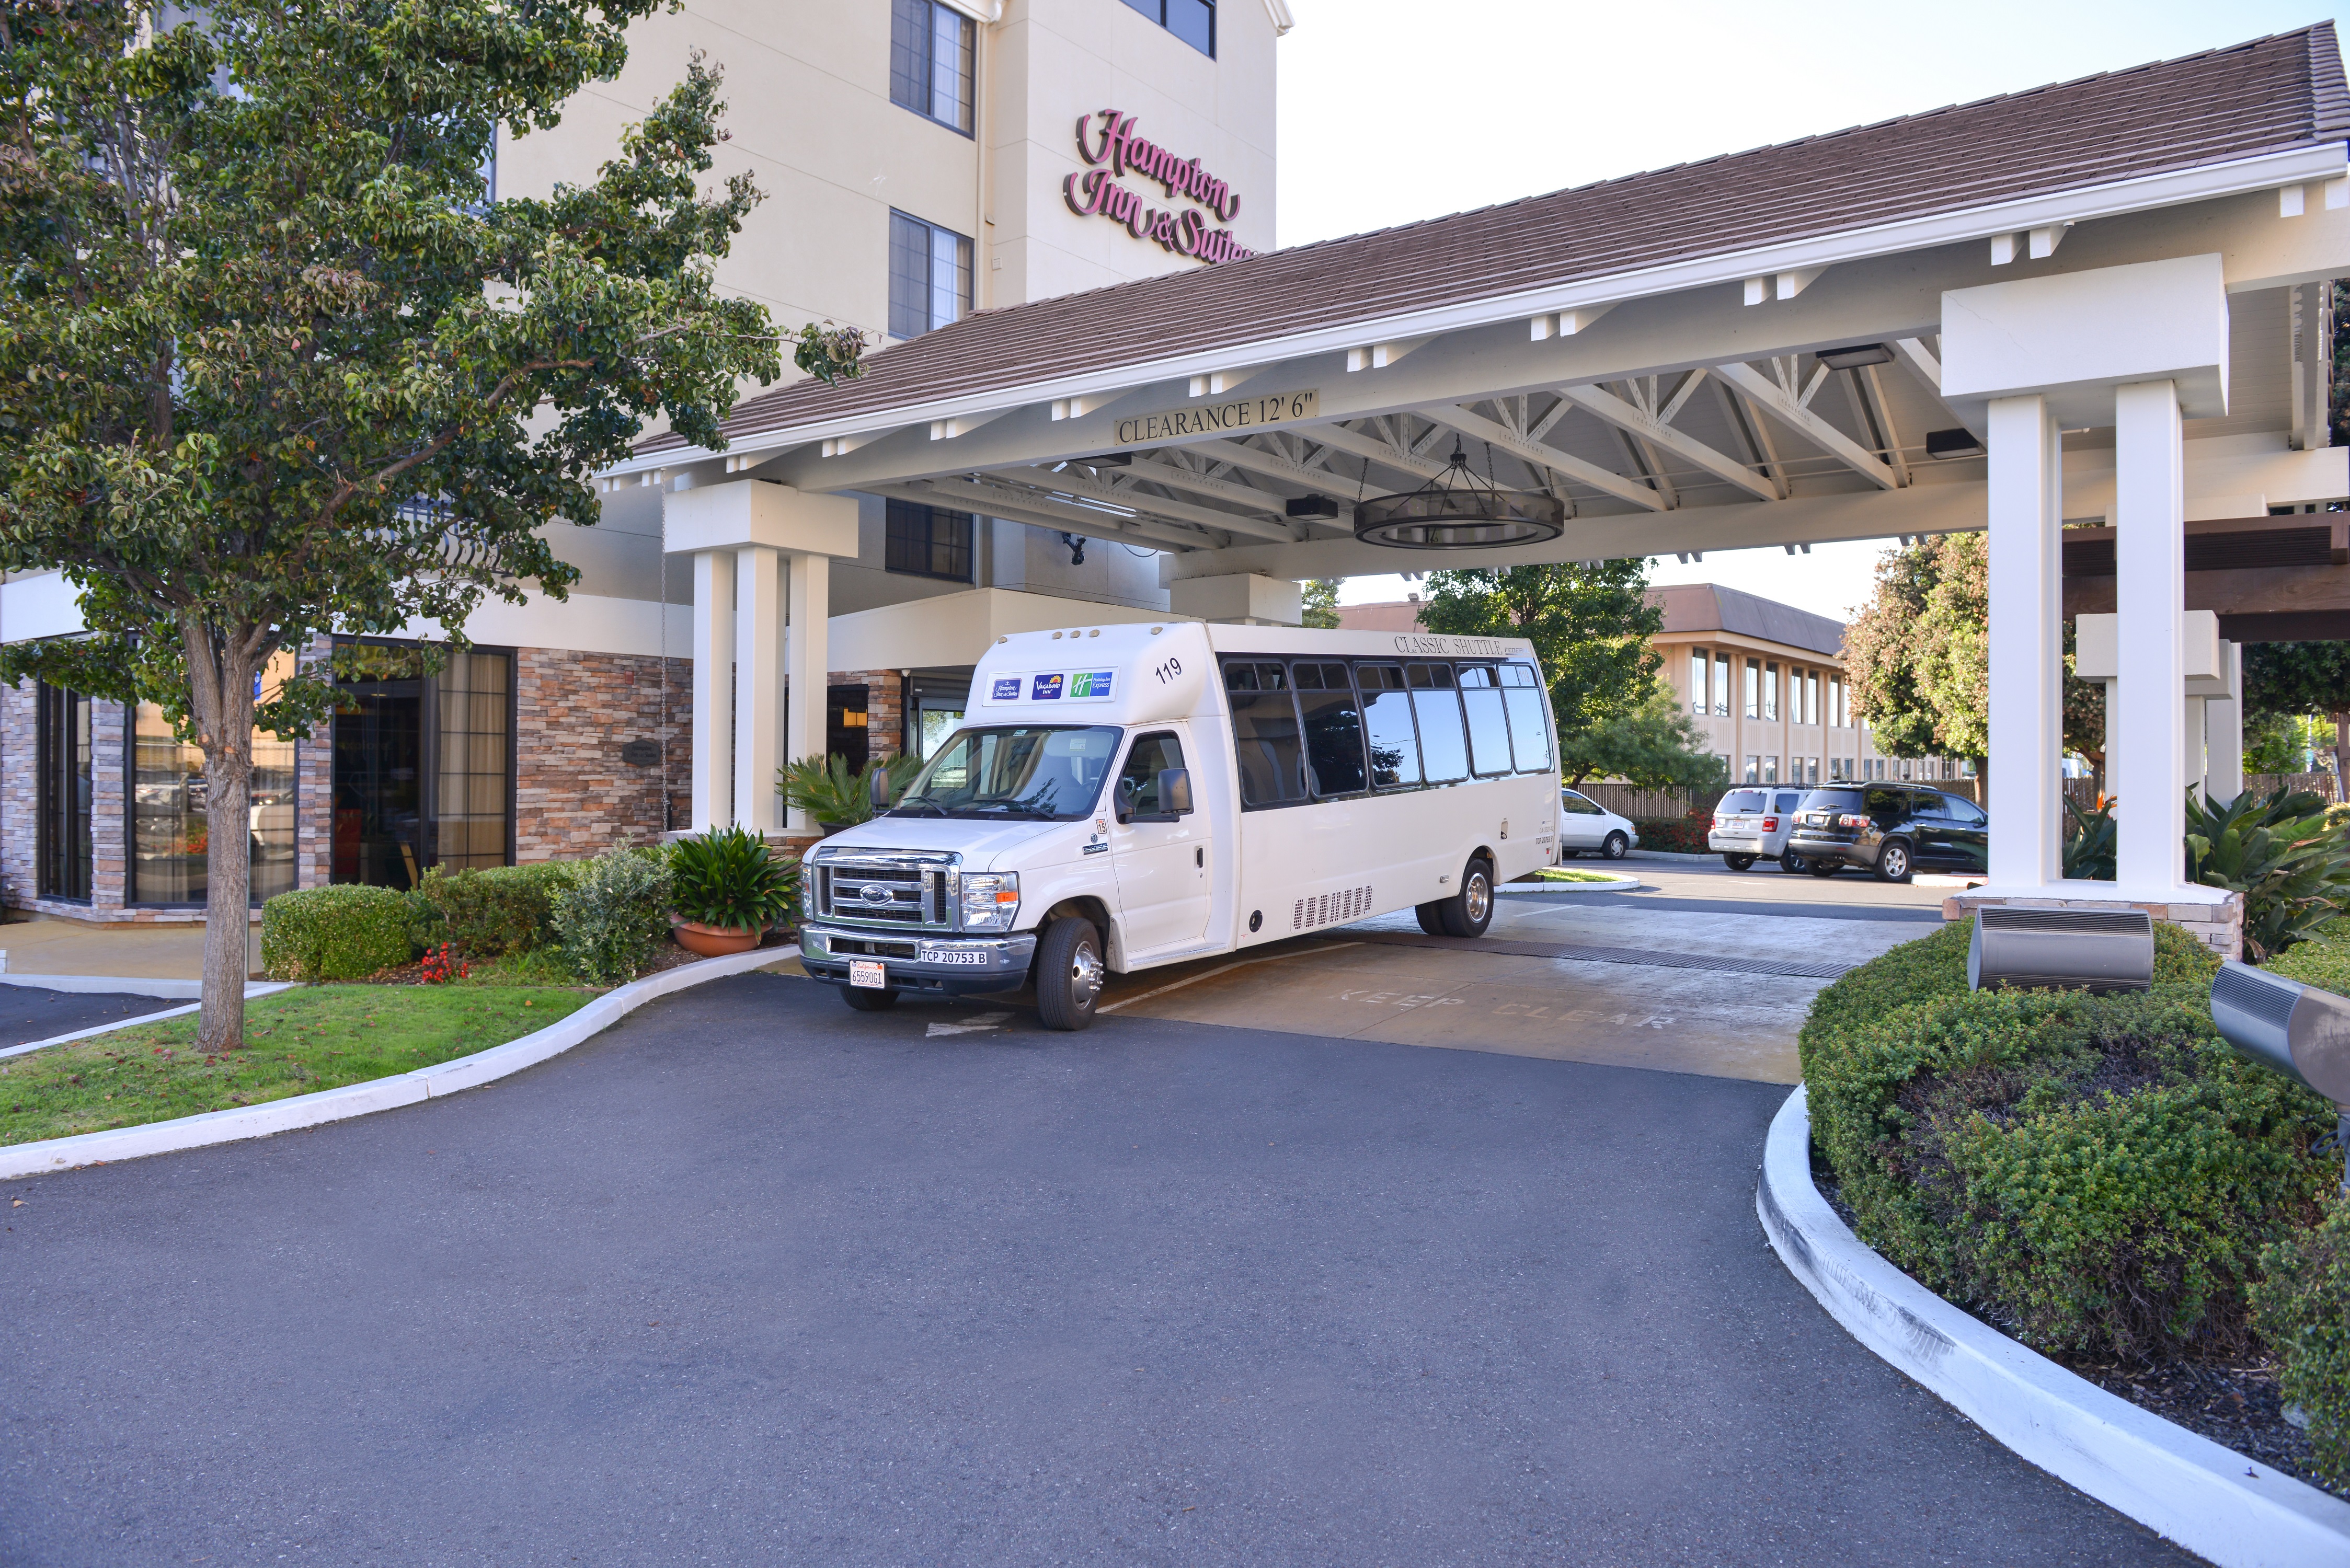 Airport Shuttle Mini-Bus at Hotel Front Entrance Area